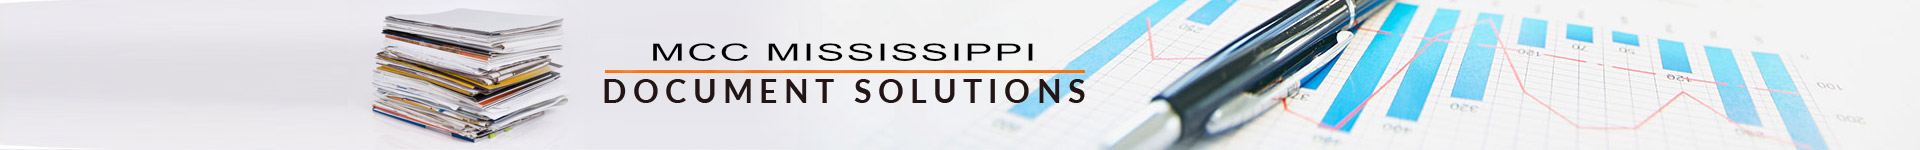 MCC Mississippi Document Solutions - Copiers and Printers